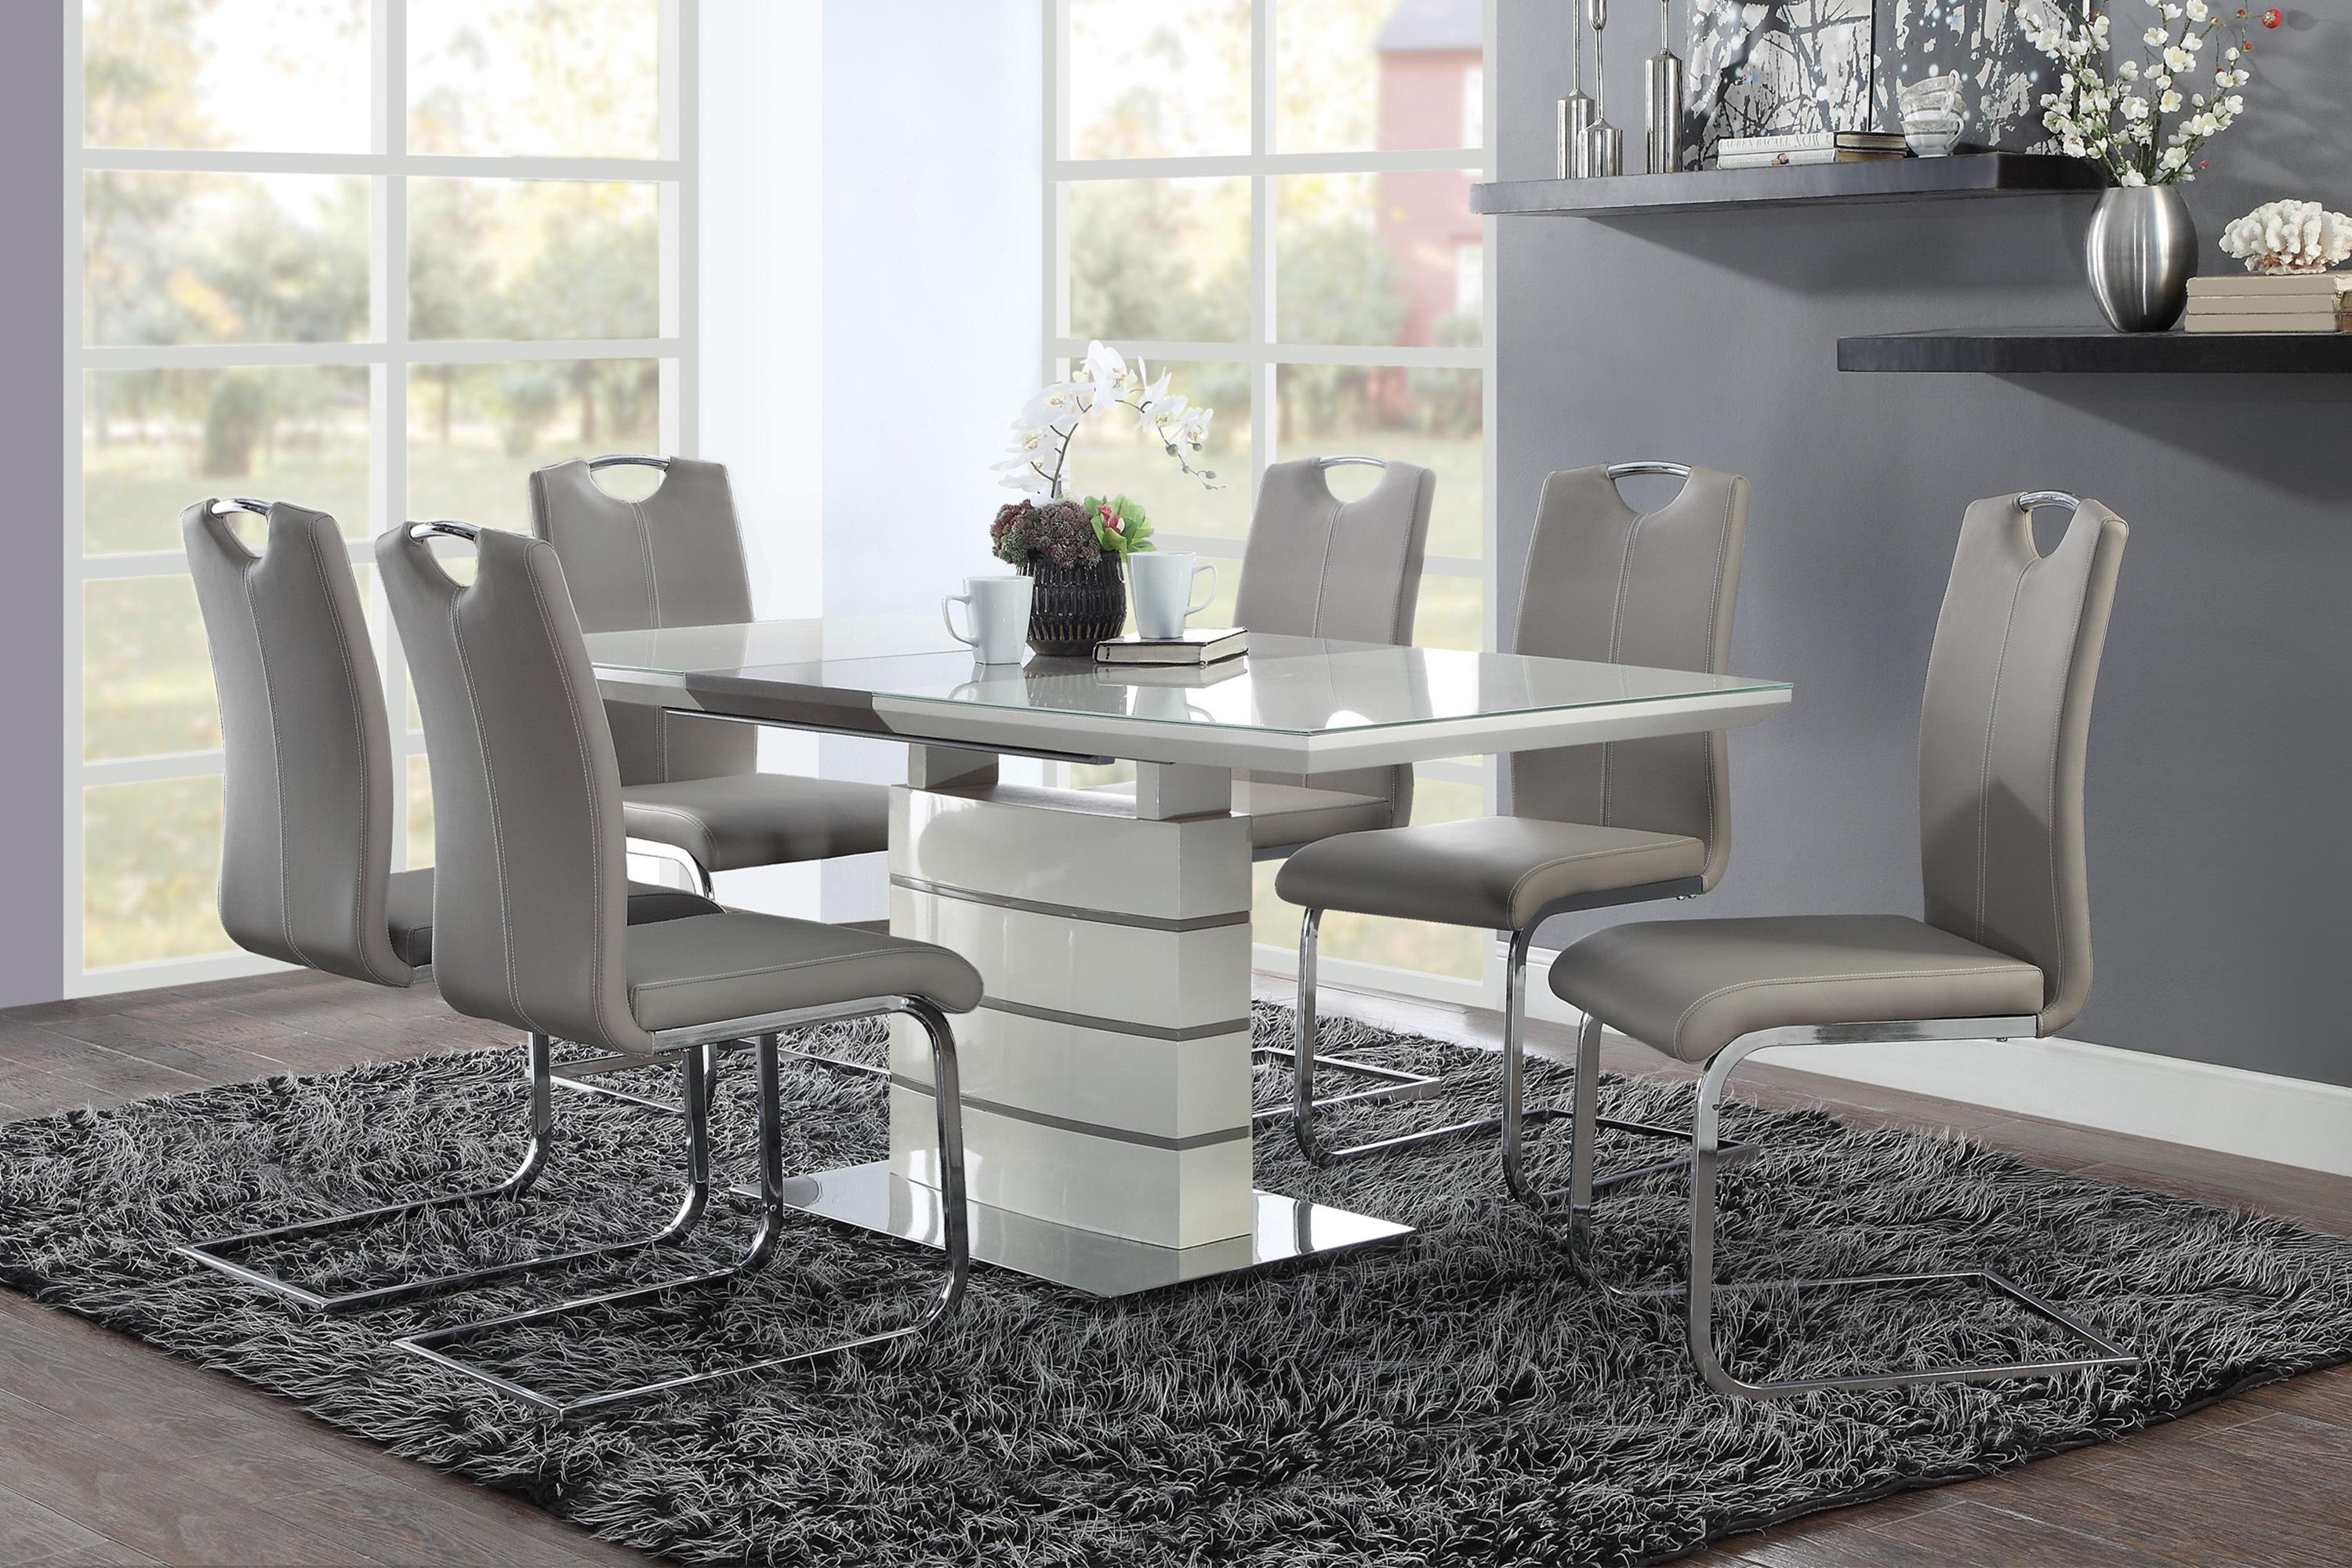 

                    
Buy Contemporary High Gloss White Wood Dining Room Set 5pcs Homelegance 5599-71* Glissand
